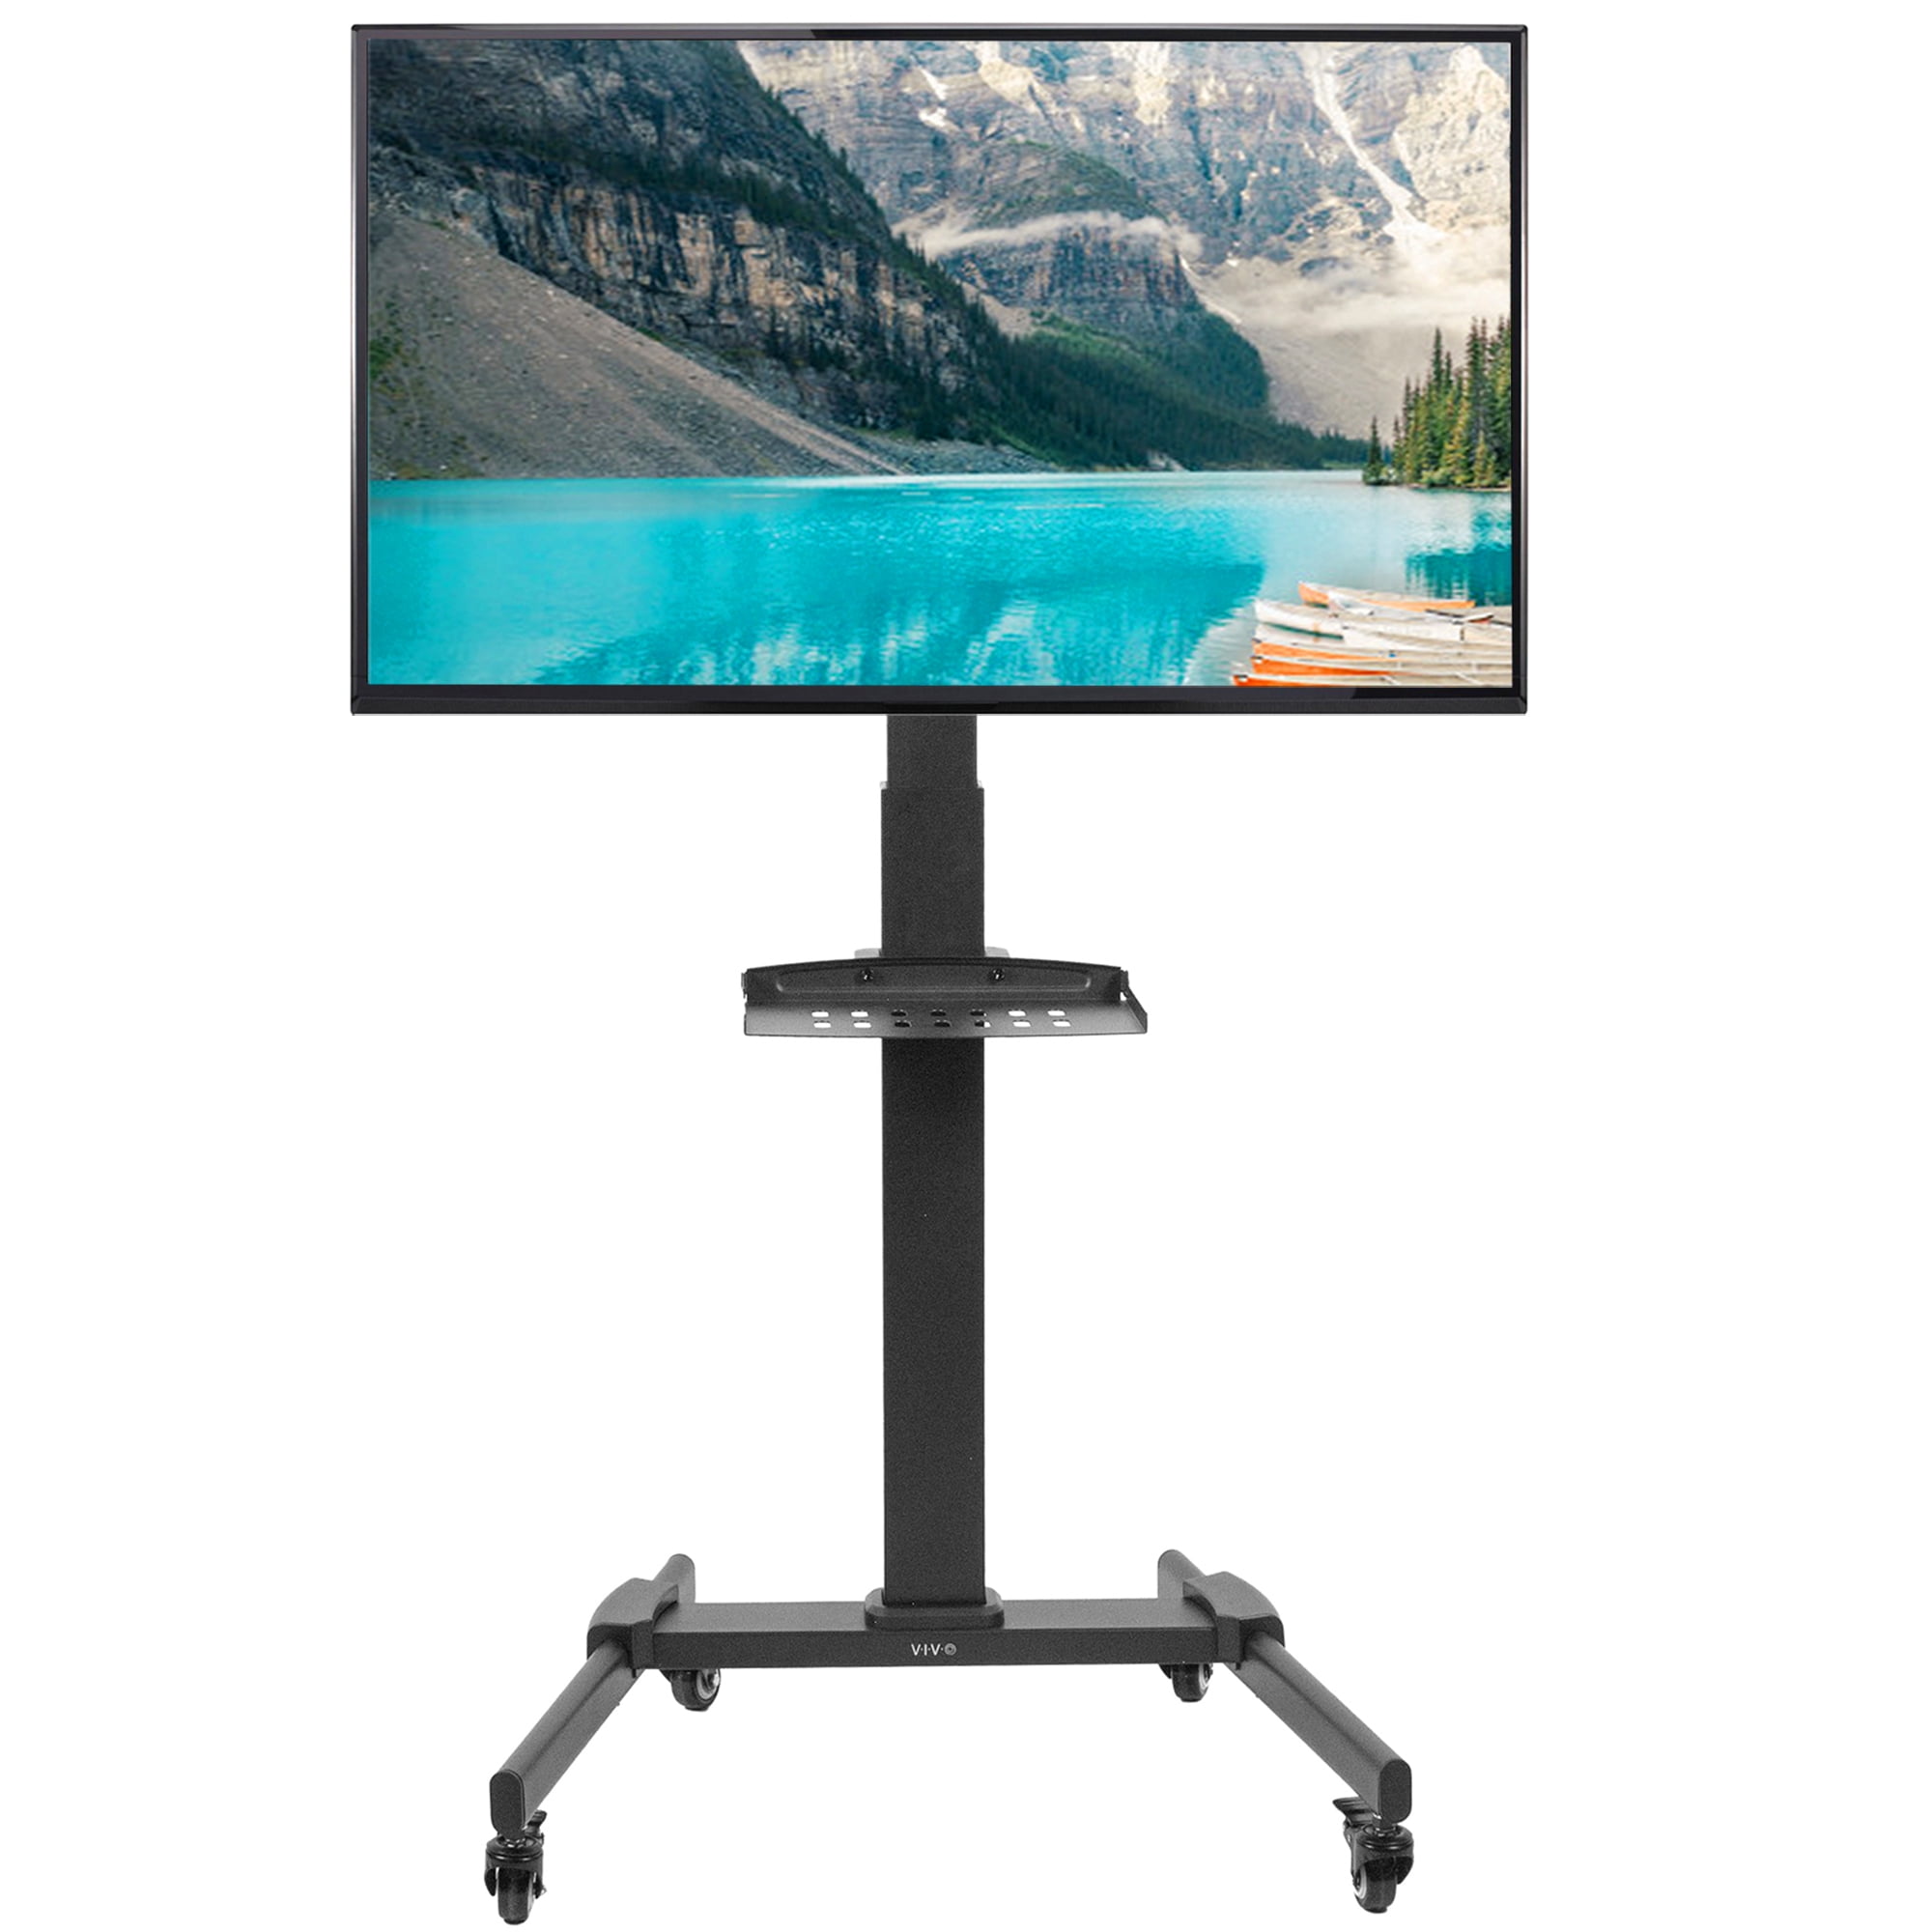 Details about   Mobile TV Cart with Tilt Mount and Wheels Portable for 32-60 Inch Flat Screen TV 